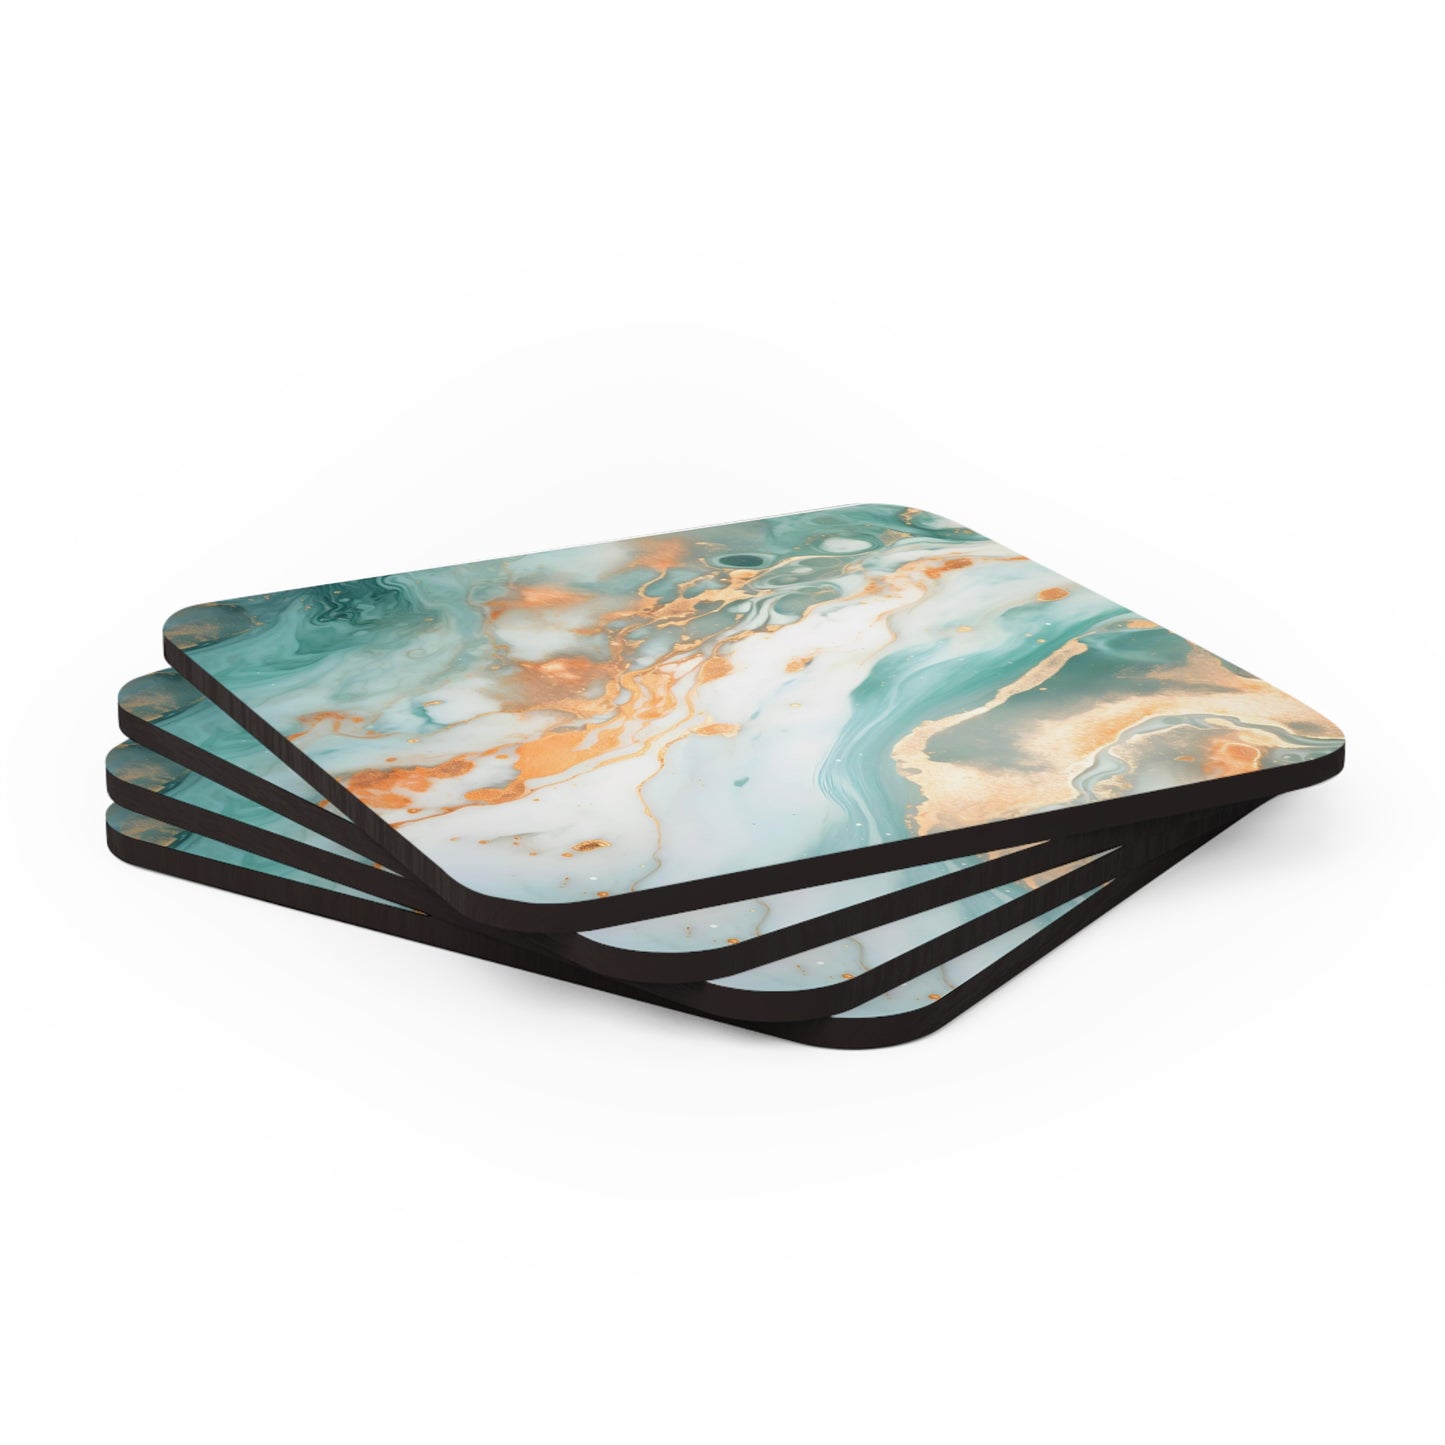 Soft Teal and Ivory Geode | Set of 4 Coasters